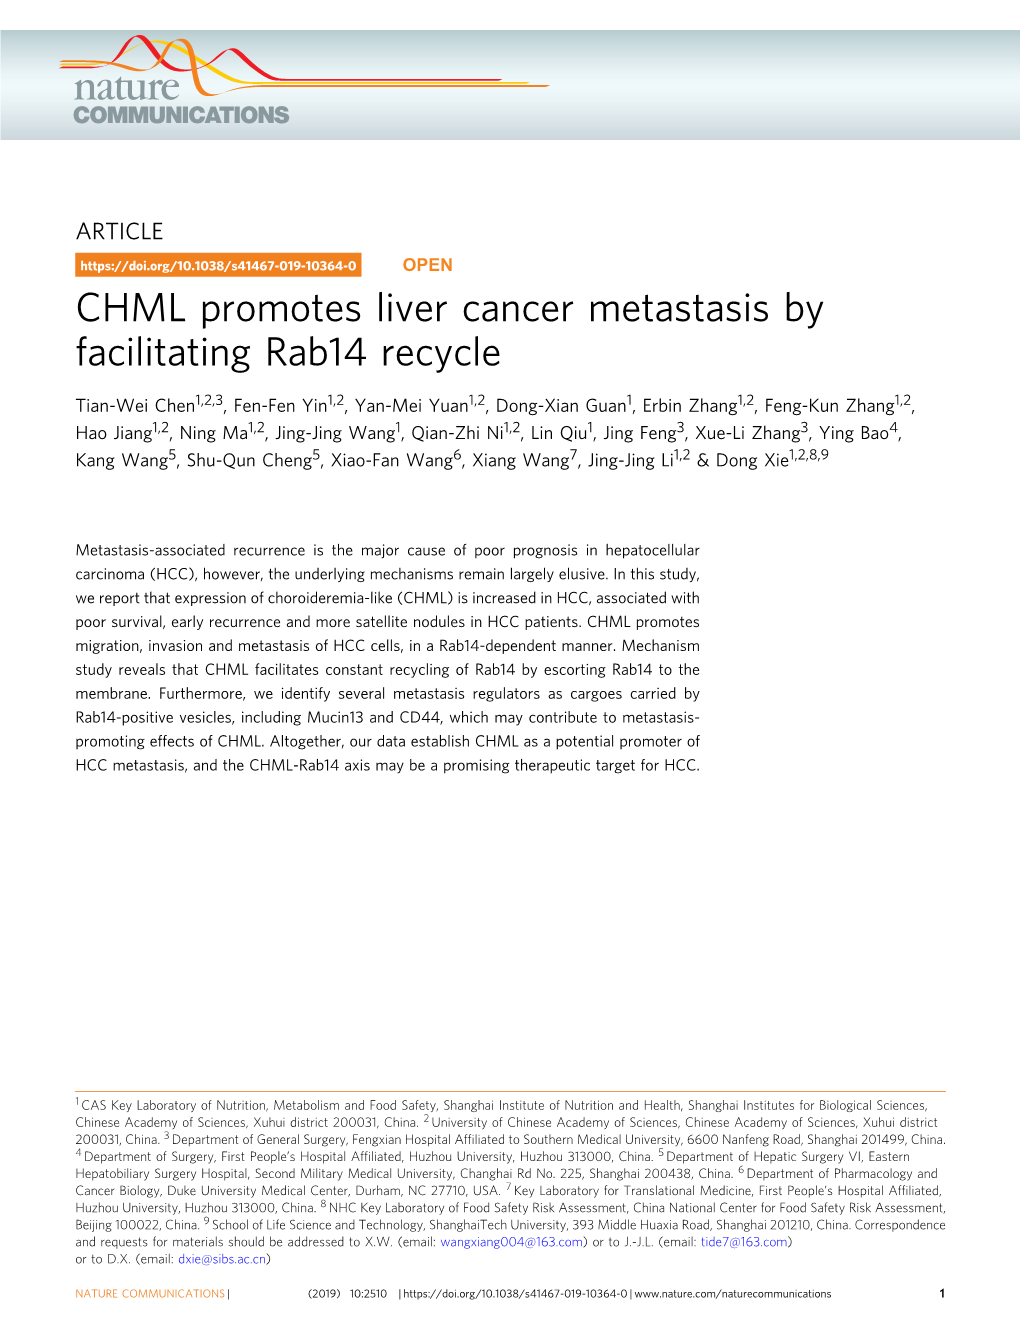 CHML Promotes Liver Cancer Metastasis by Facilitating Rab14 Recycle